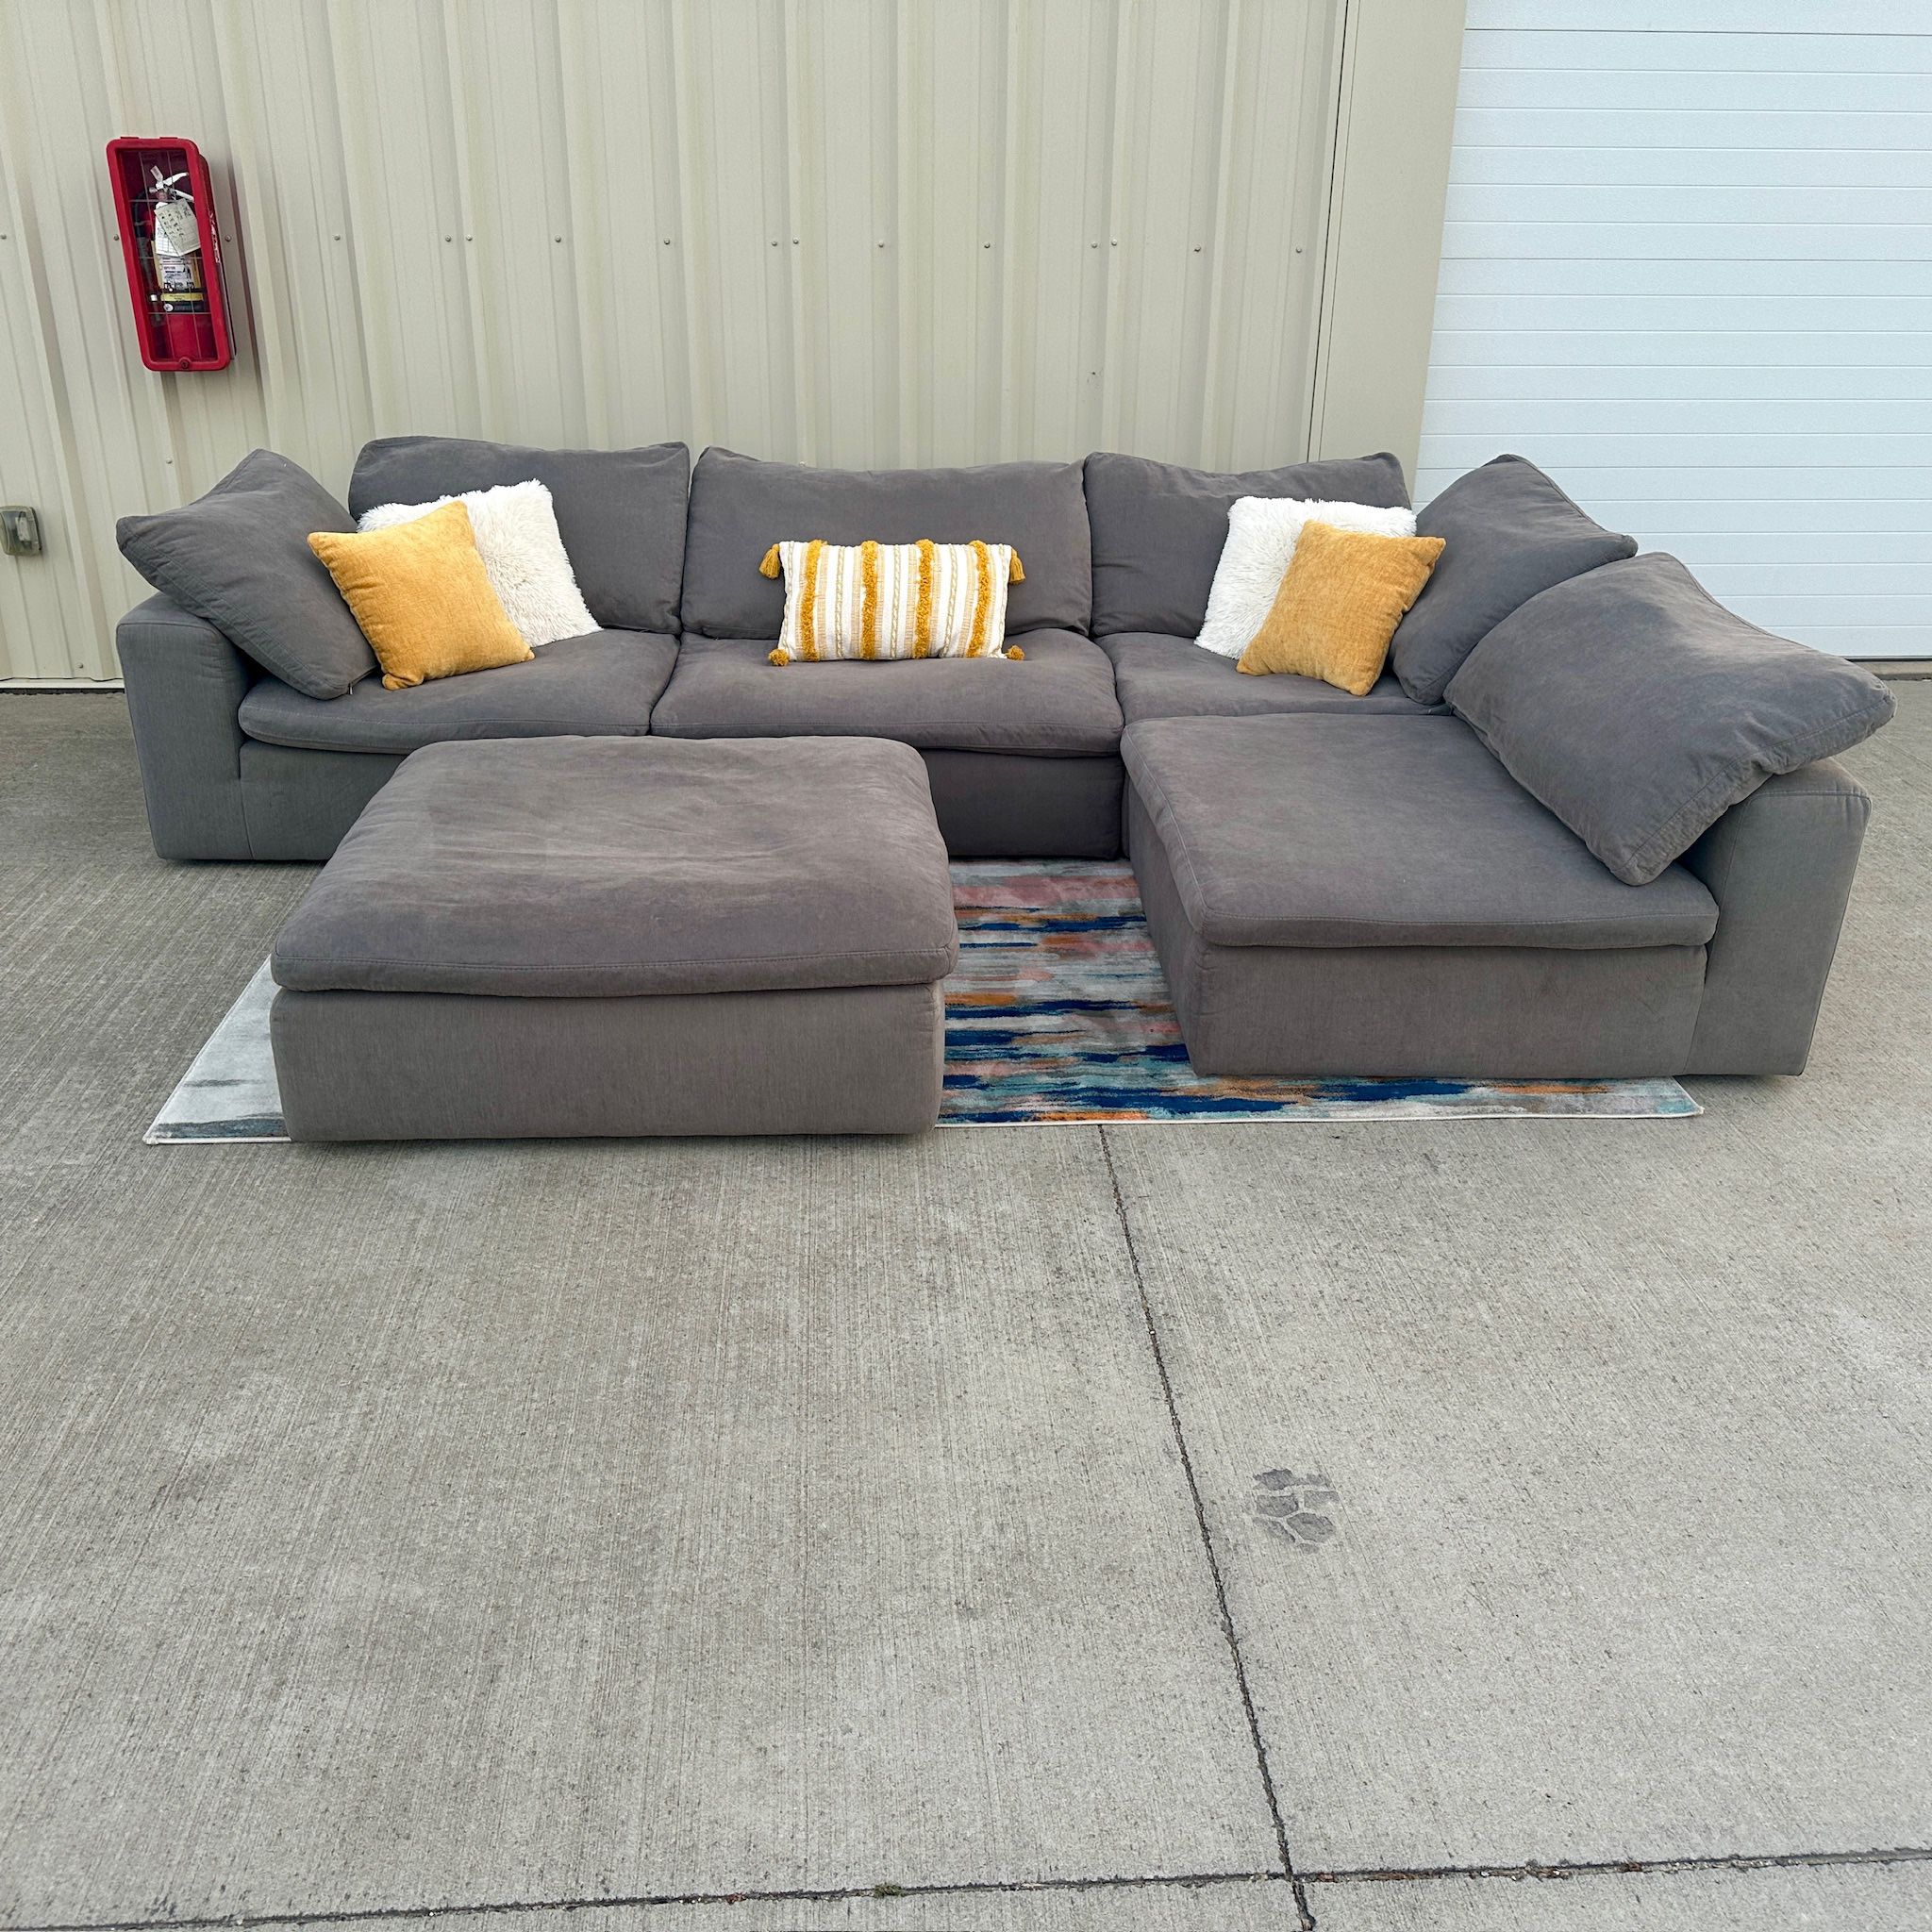 Modular 5pc Sectional  /w Ottoman by Bob’s Discount Furniture